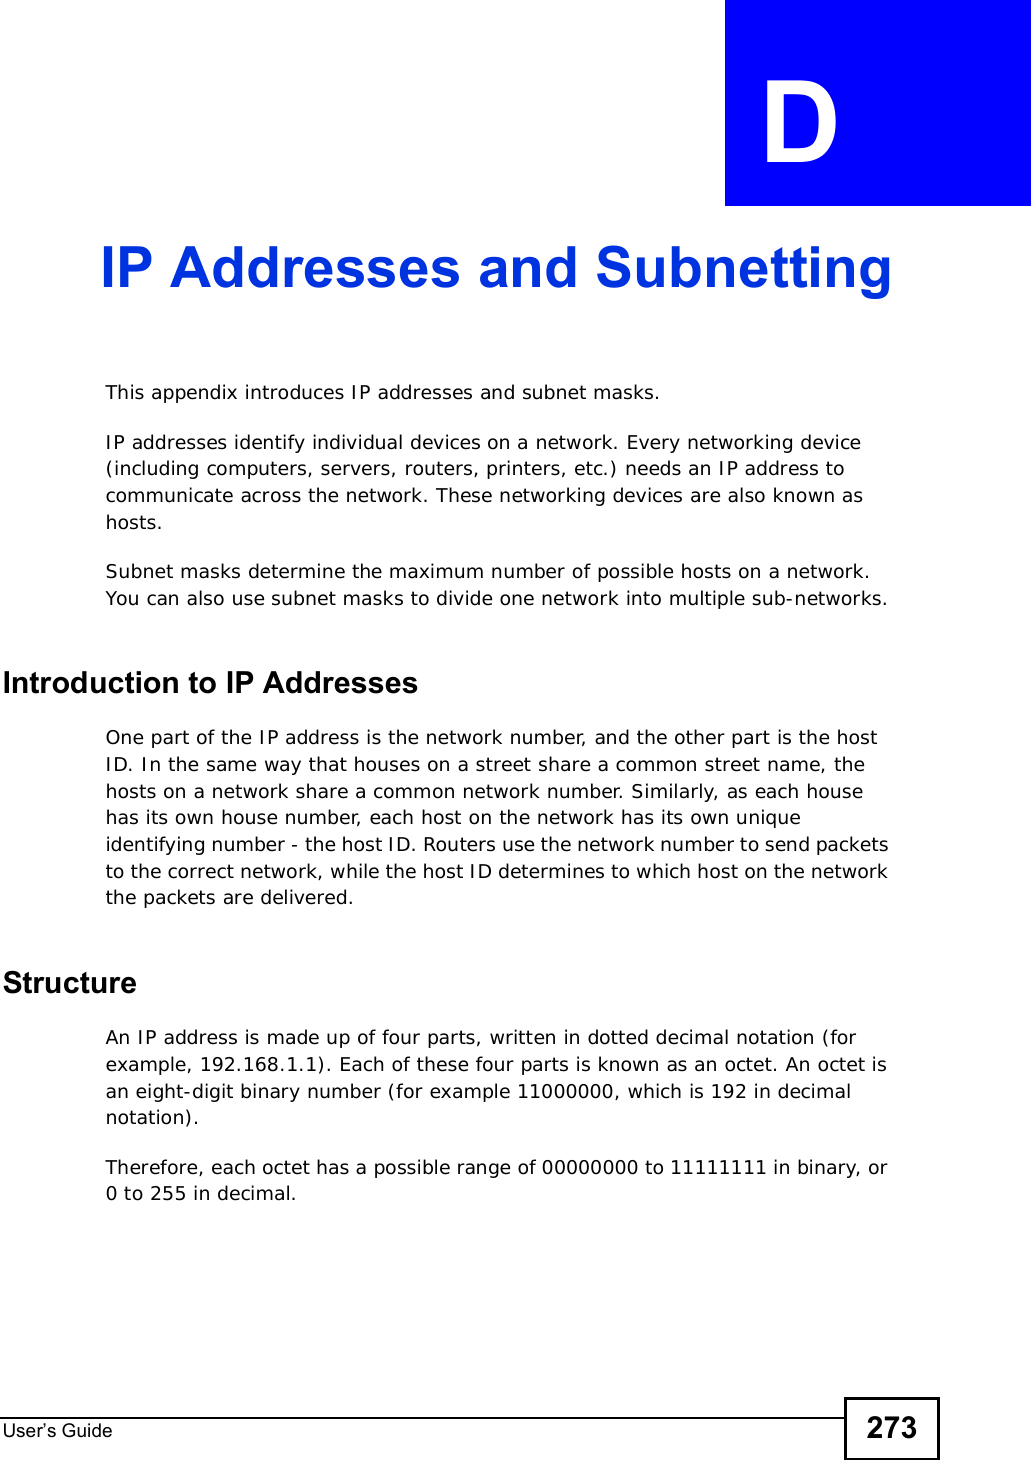 User s Guide 273APPENDIX  D IP Addresses and SubnettingThis appendix introduces IP addresses and subnet masks. IP addresses identify individual devices on a network. Every networking device (including computers, servers, routers, printers, etc.) needs an IP address to communicate across the network. These networking devices are also known as hosts.Subnet masks determine the maximum number of possible hosts on a network. You can also use subnet masks to divide one network into multiple sub-networks.Introduction to IP AddressesOne part of the IP address is the network number, and the other part is the host ID. In the same way that houses on a street share a common street name, the hosts on a network share a common network number. Similarly, as each house has its own house number, each host on the network has its own unique identifying number - the host ID. Routers use the network number to send packets to the correct network, while the host ID determines to which host on the network the packets are delivered.StructureAn IP address is made up of four parts, written in dotted decimal notation (for example, 192.168.1.1). Each of these four parts is known as an octet. An octet is an eight-digit binary number (for example 11000000, which is 192 in decimal notation). Therefore, each octet has a possible range of 00000000 to 11111111 in binary, or 0 to 255 in decimal.